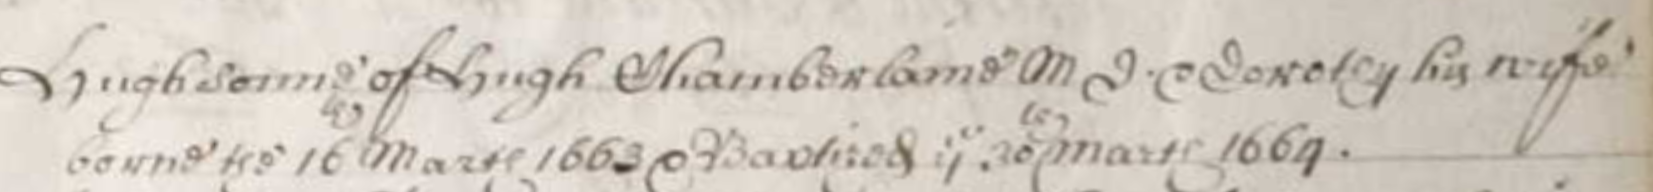 Figure 1: Baptism Record for Hugh Chamberlen the younger